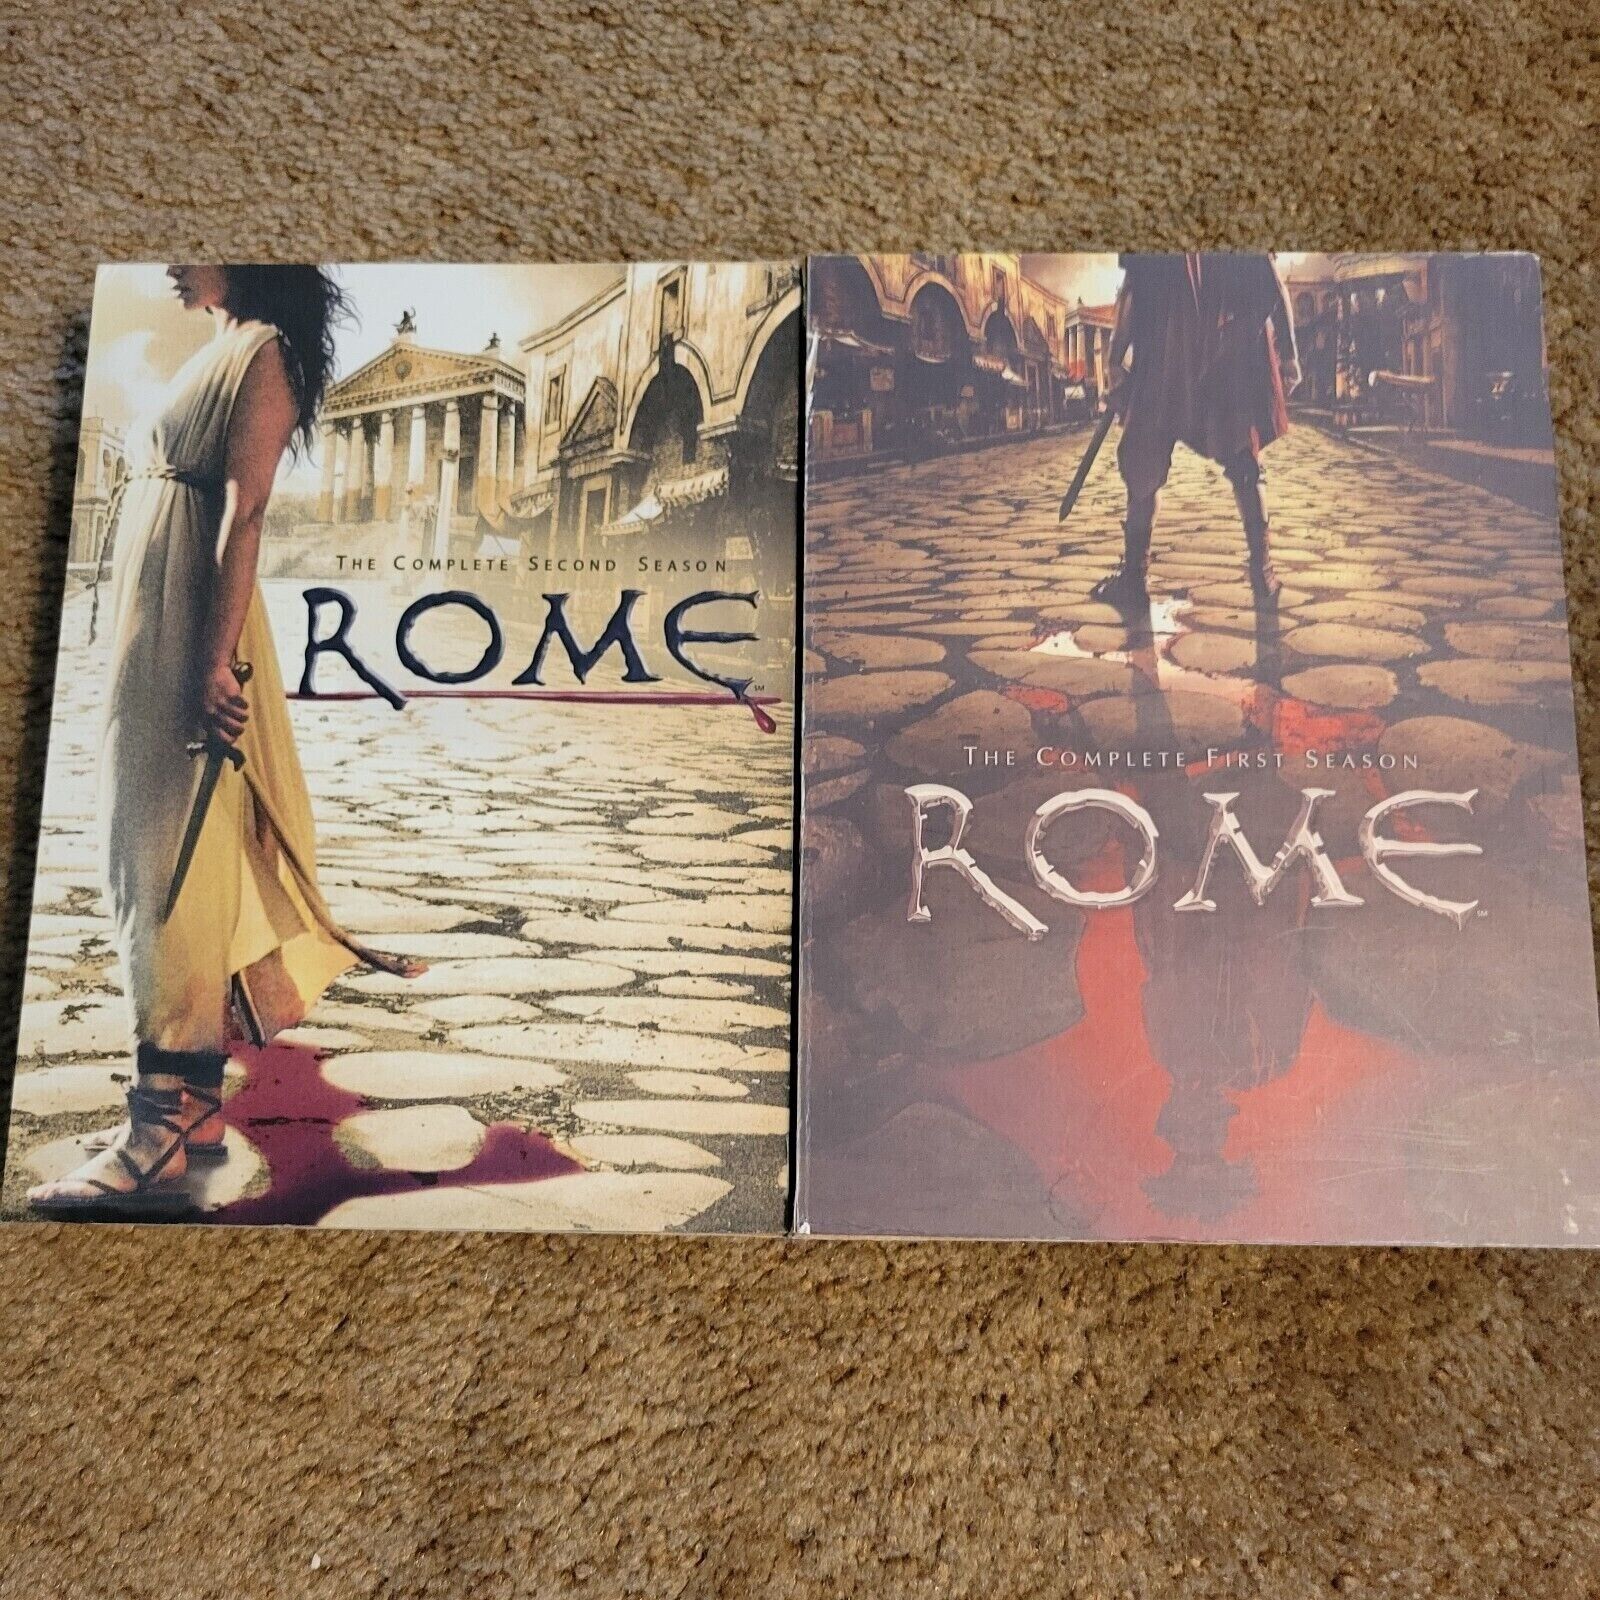 Rome DVD First and Second Season Box Set HBO TV Series Drama - $18.37